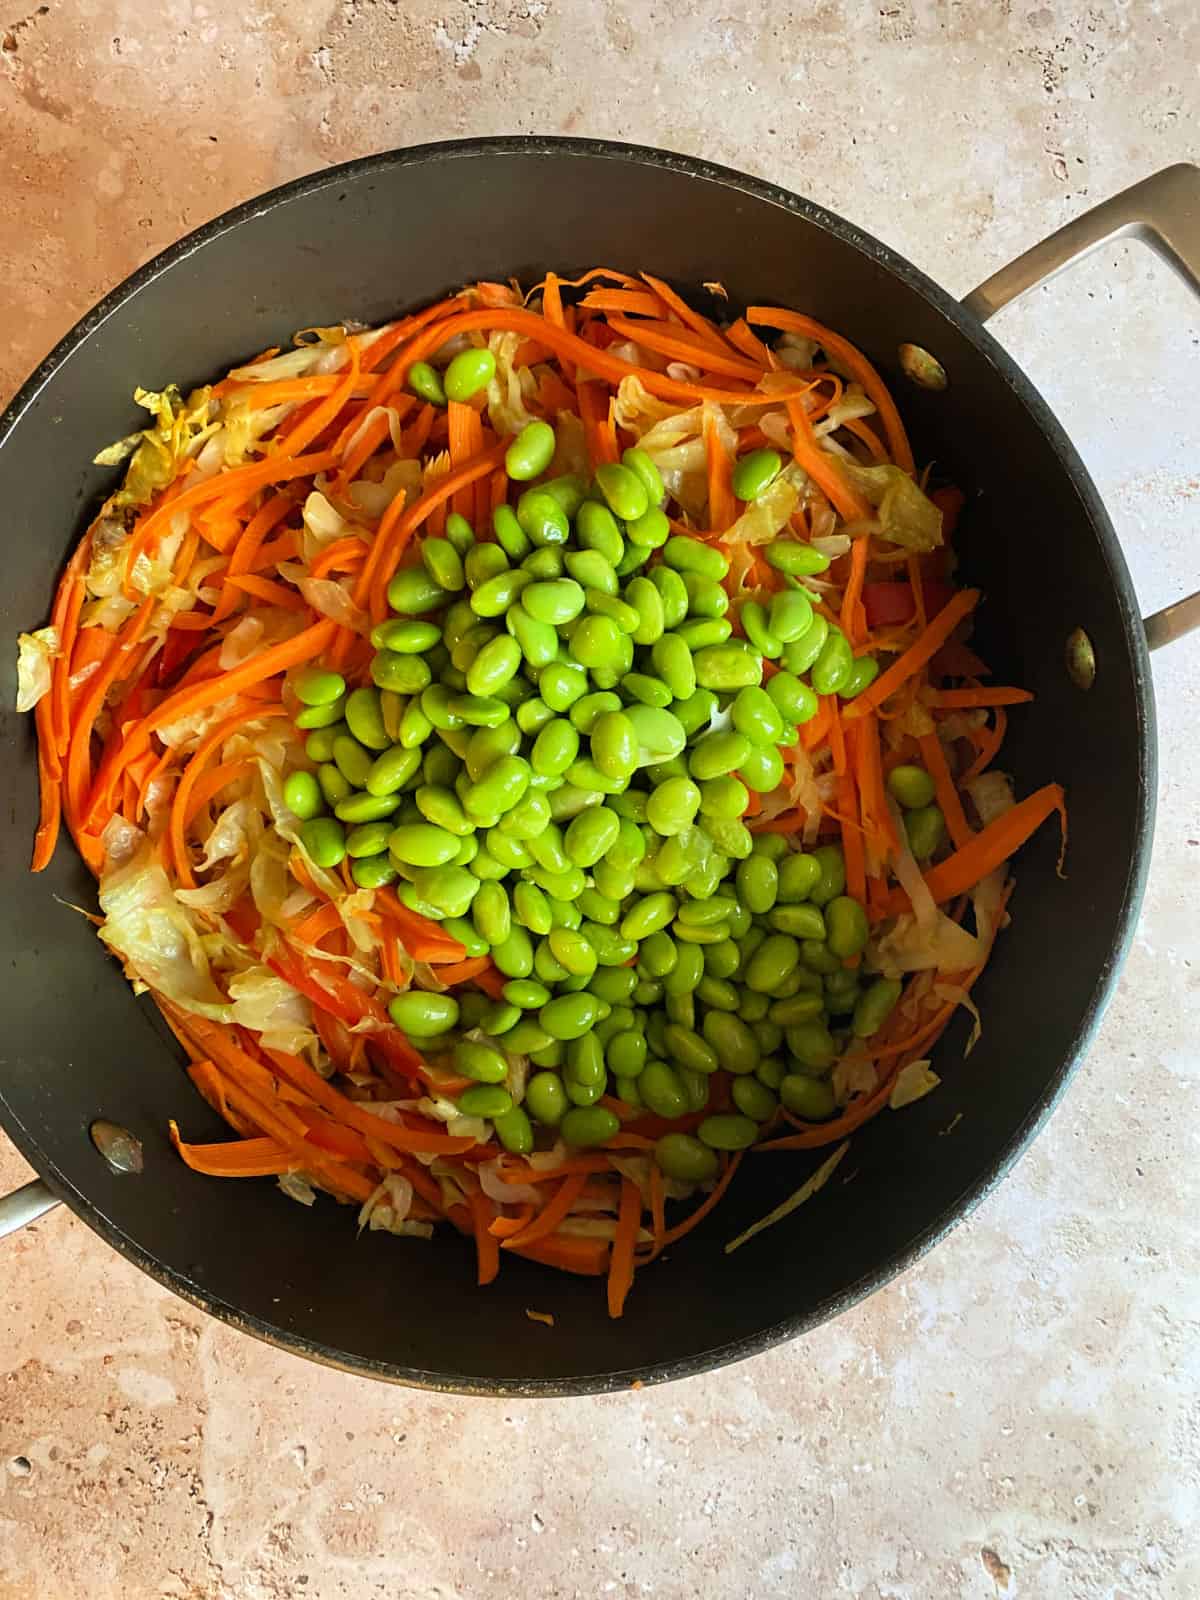 Ingredients of cabbage stir fry in a pan